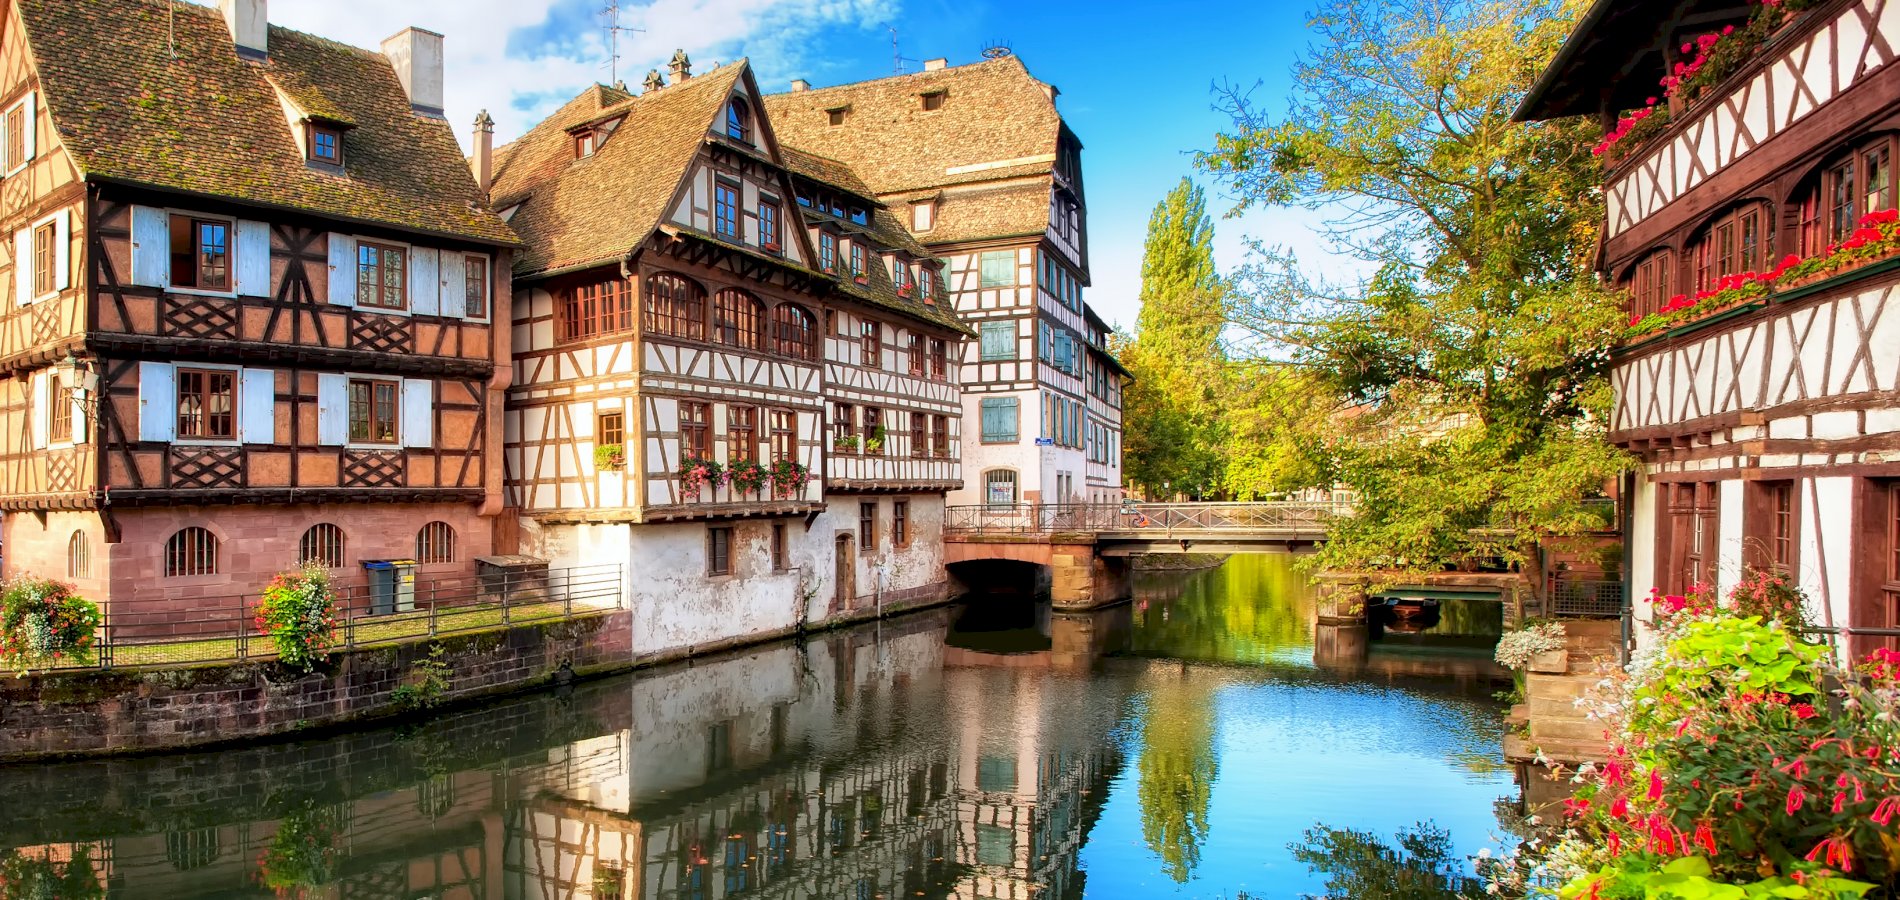 Ophorus Tours - Strasbourg Small Group Private Guided Walking Tour with a Licensed Tour Guide